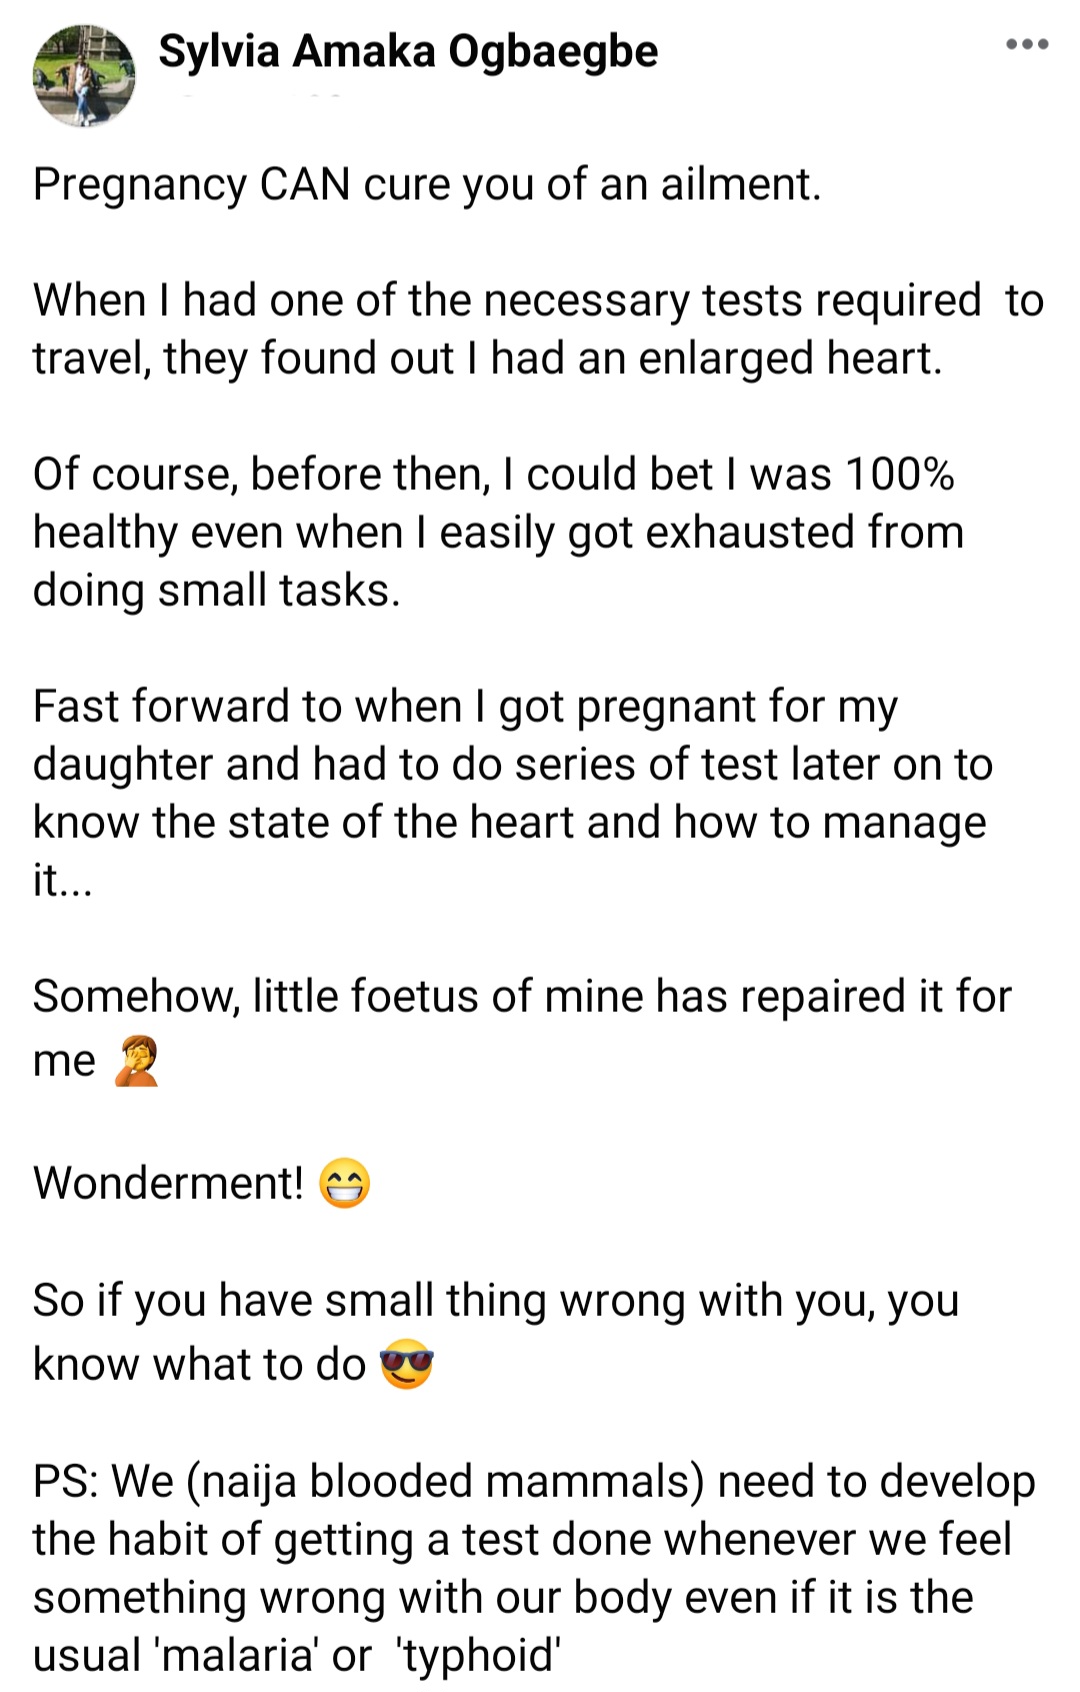 Mother reveals how pregnancy cured her of an enlarged heart